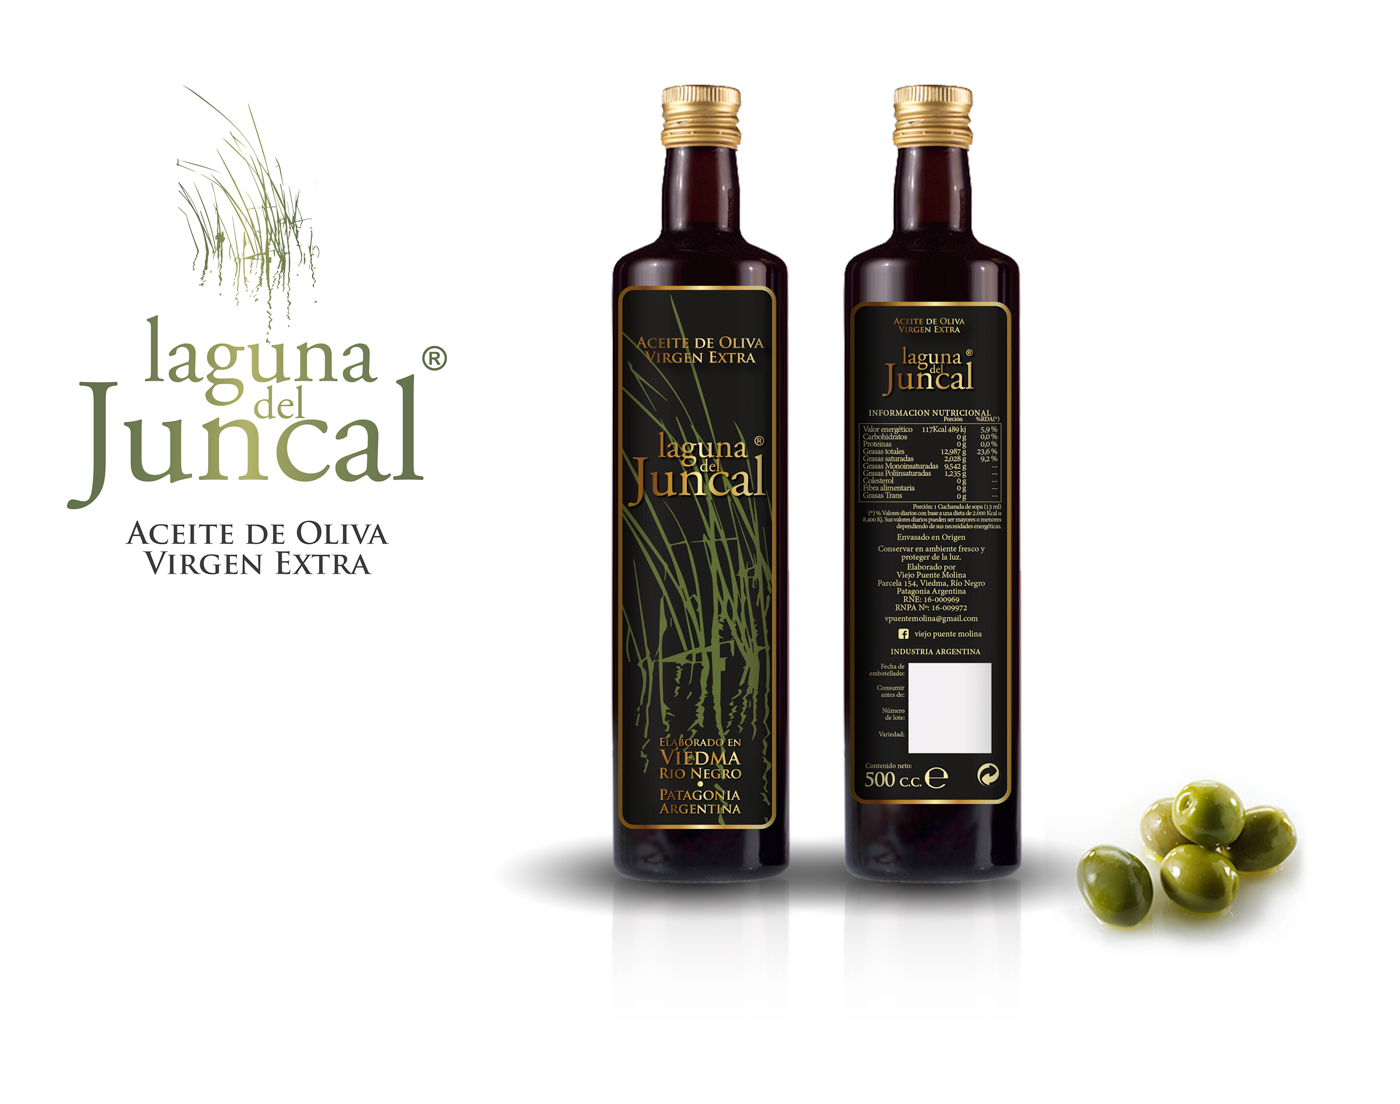 Creative graphic design work portfolio of logo and corporate brand creation for extra virgin olive oil producing company in Argentina: LAGUNA DEL JUNCAL